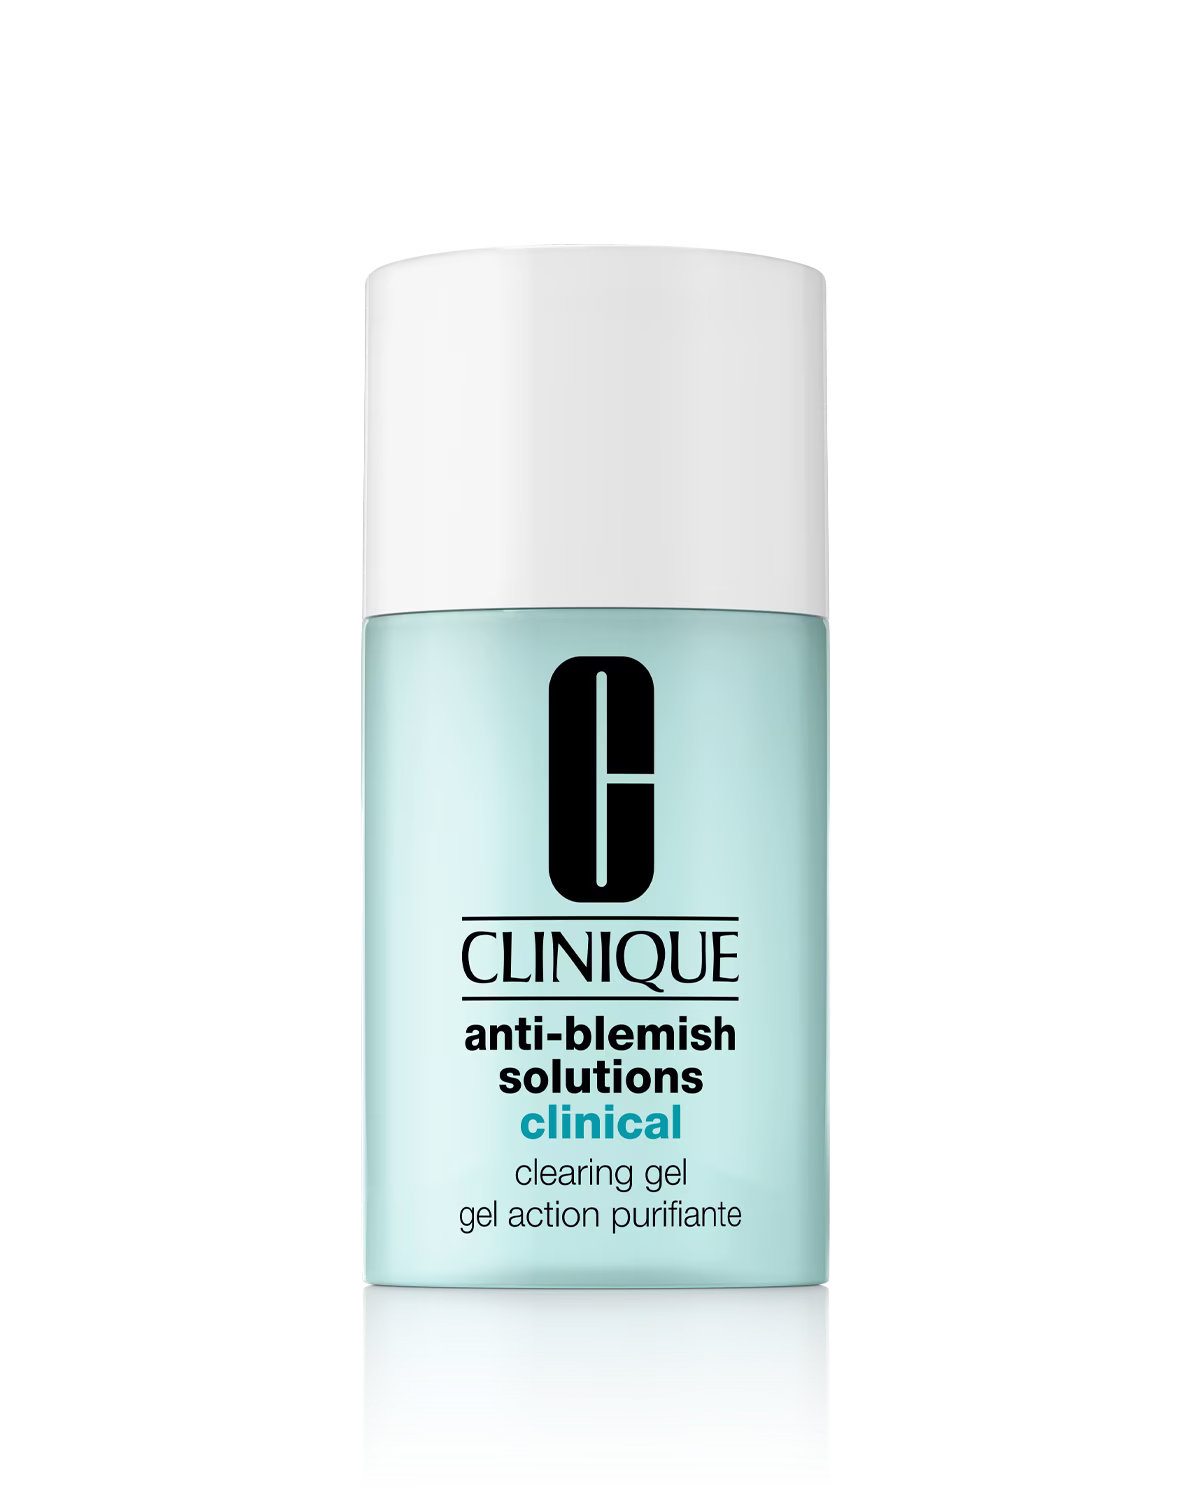 CLINIQUE Anti-Blemish Solutions Clinical Clearing Gel 30mL